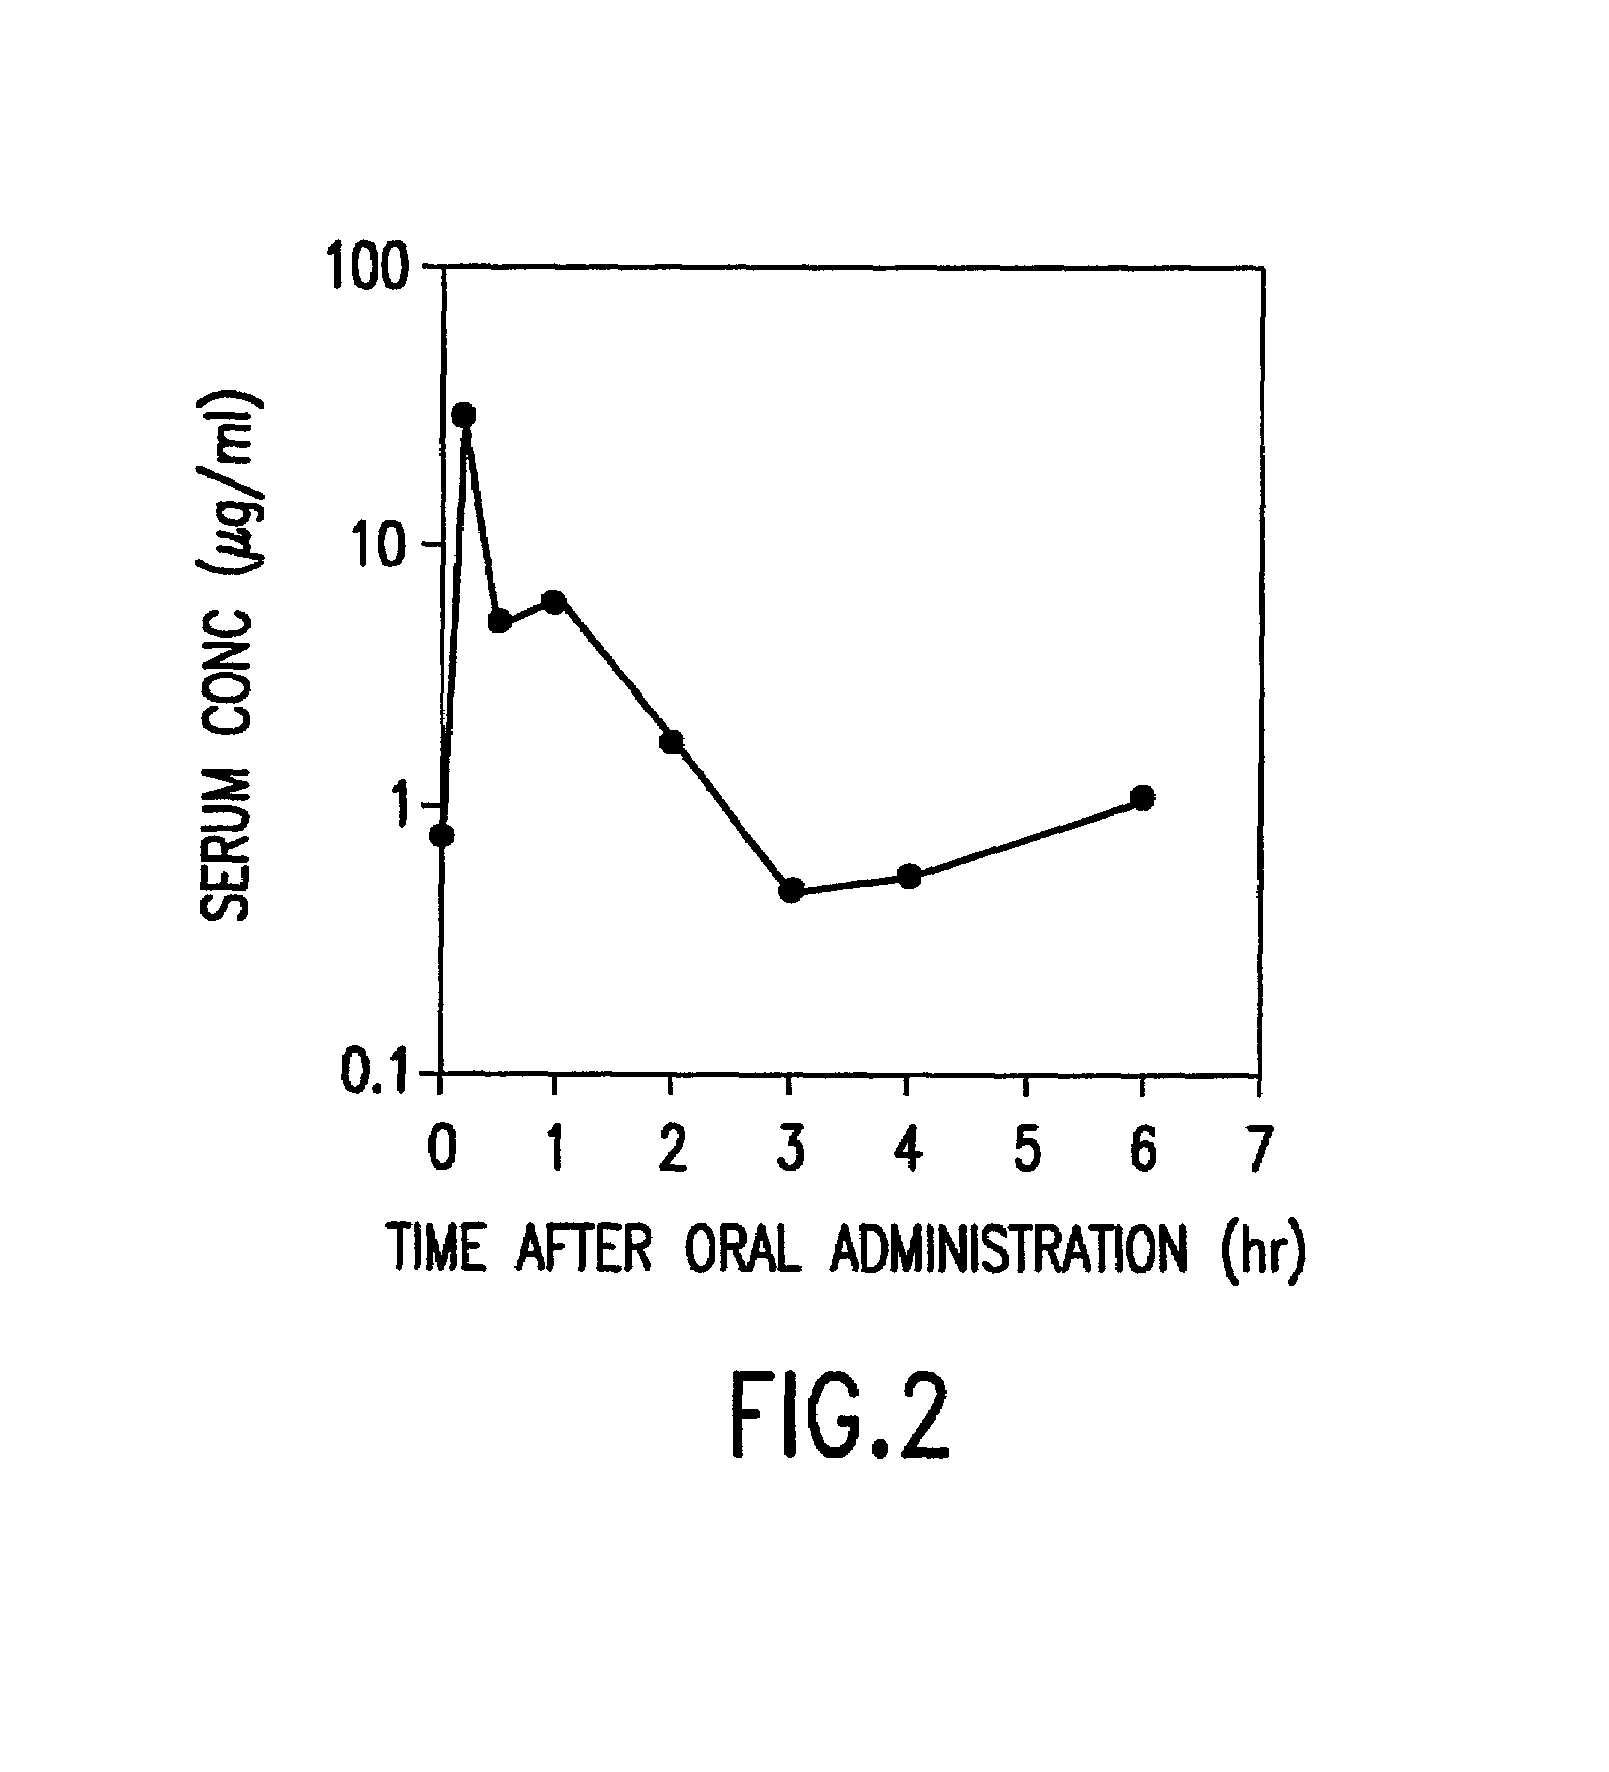 Preparation of aqueous clear solution dosage forms with bile acids